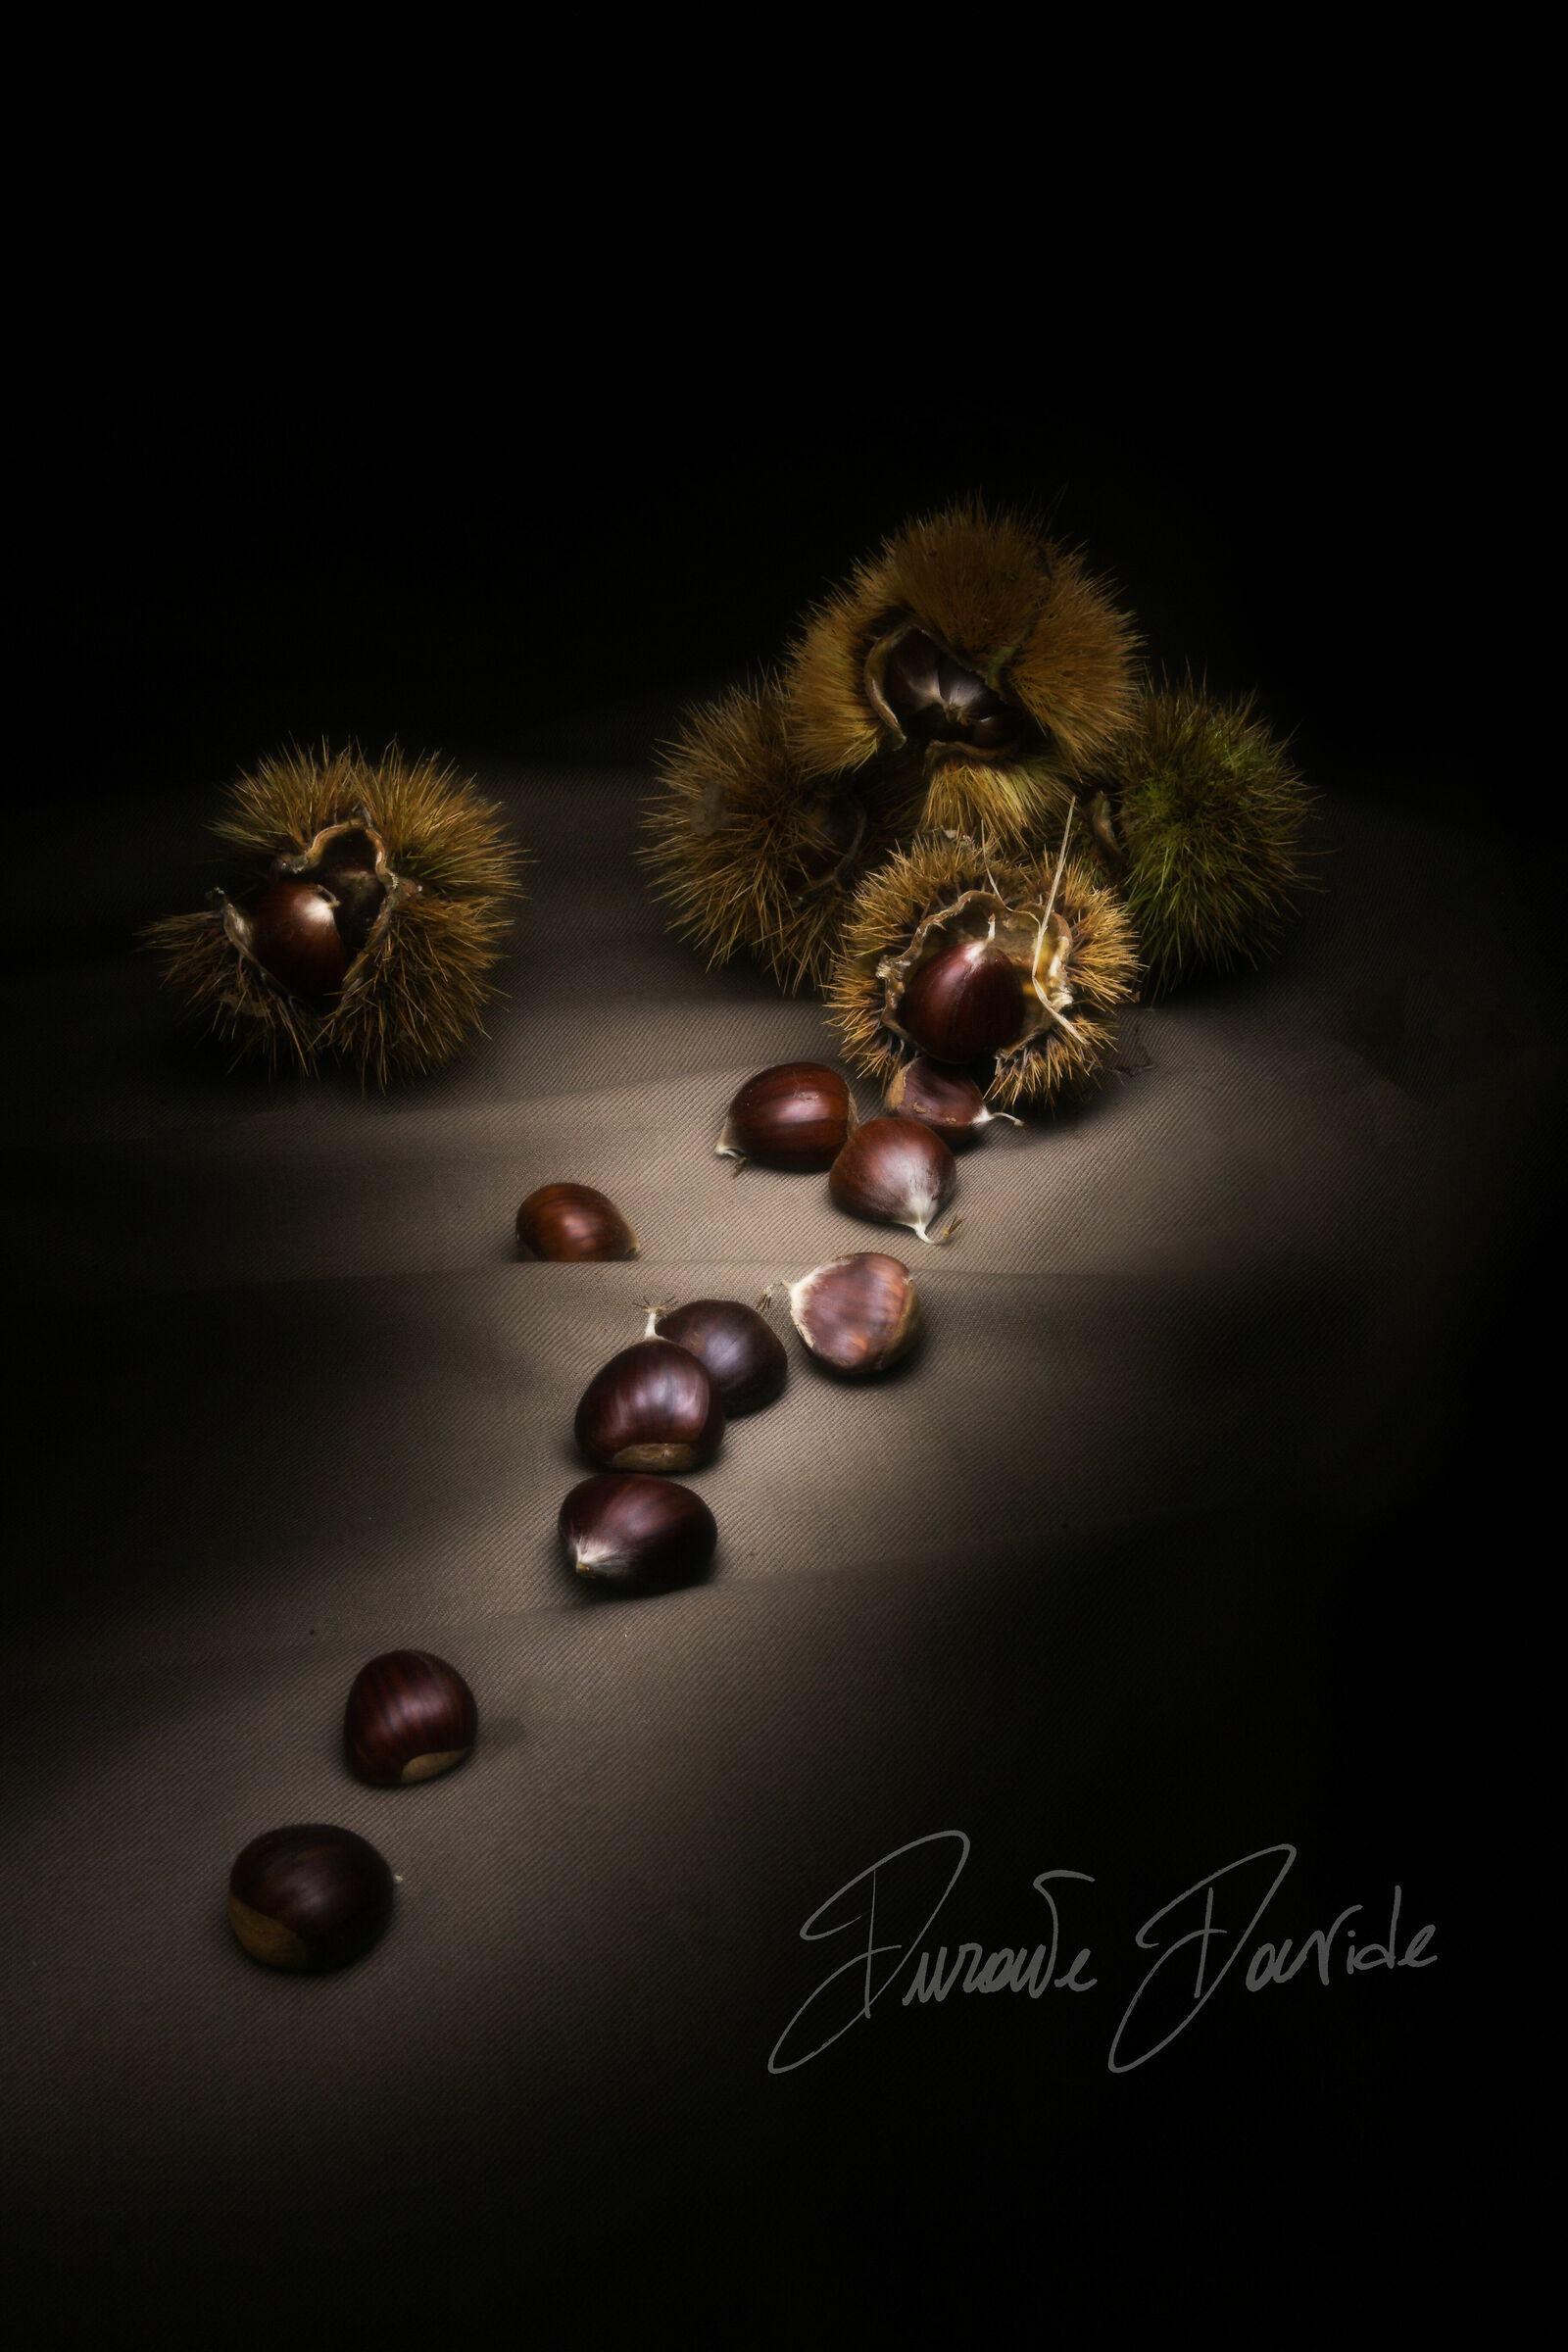 Chestnuts and colors...